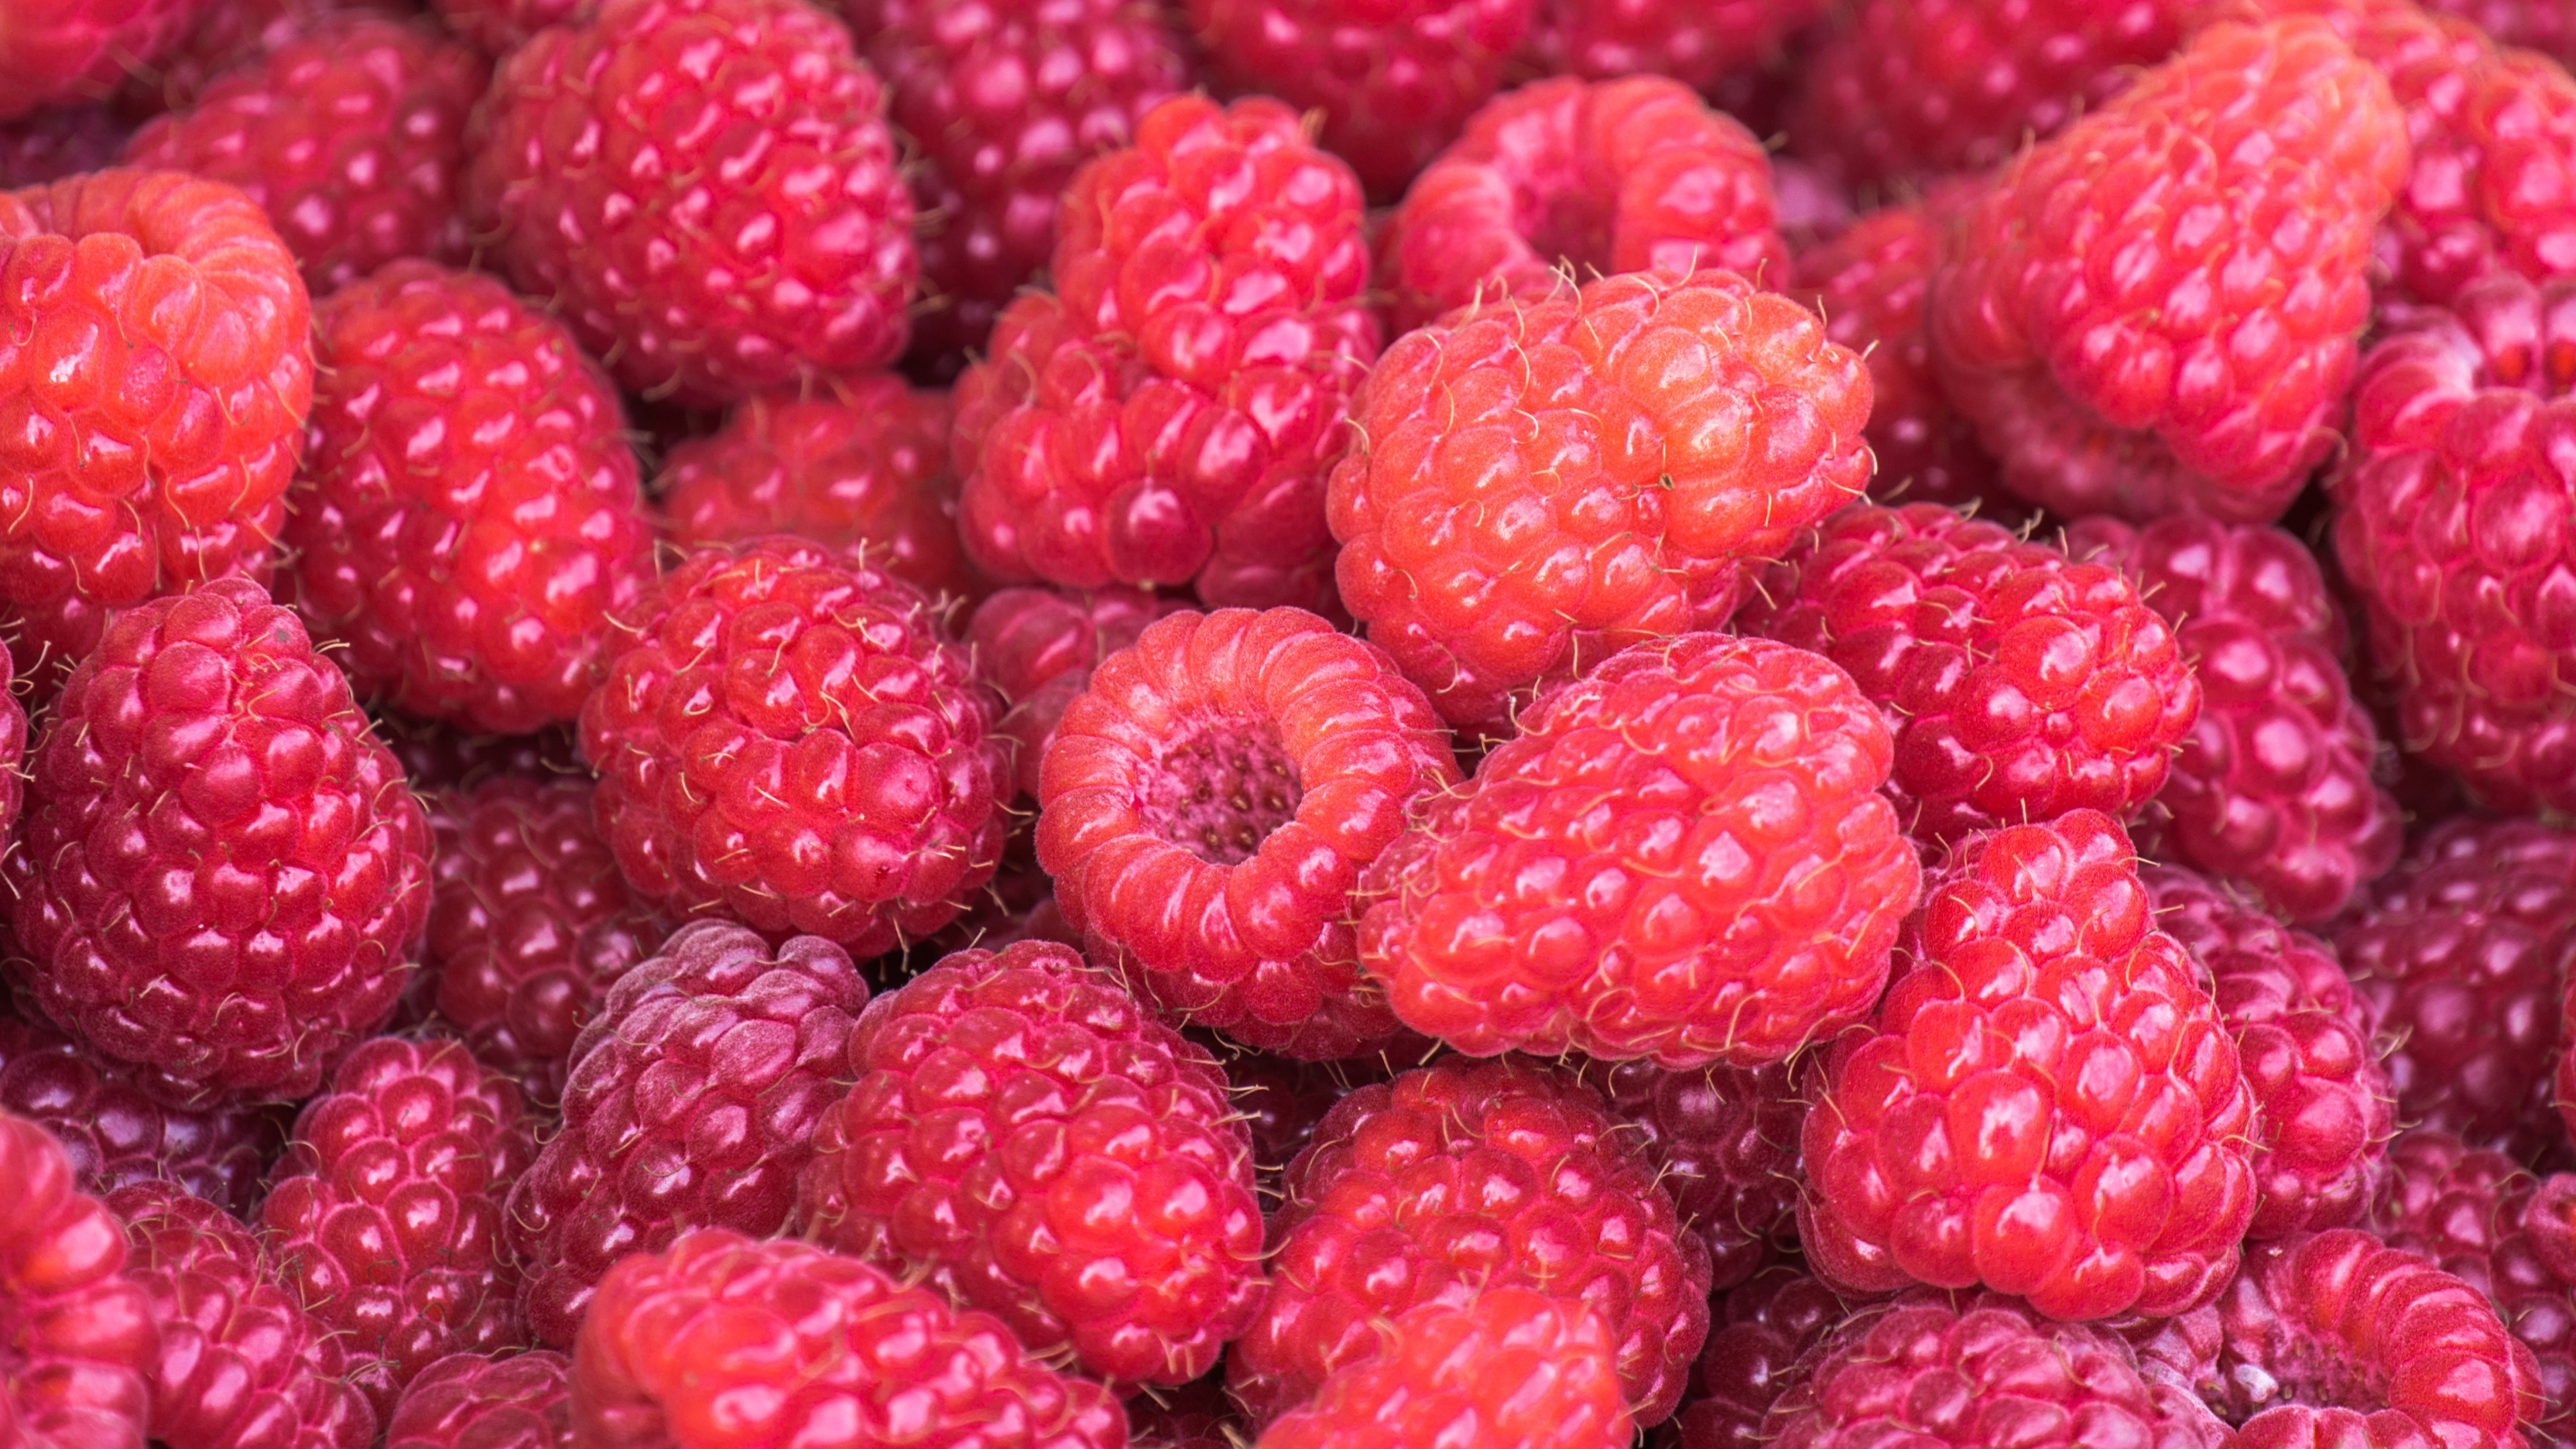 Red Raspberry Fruits in Close up Photography. Wallpaper in 3840x2160 Resolution